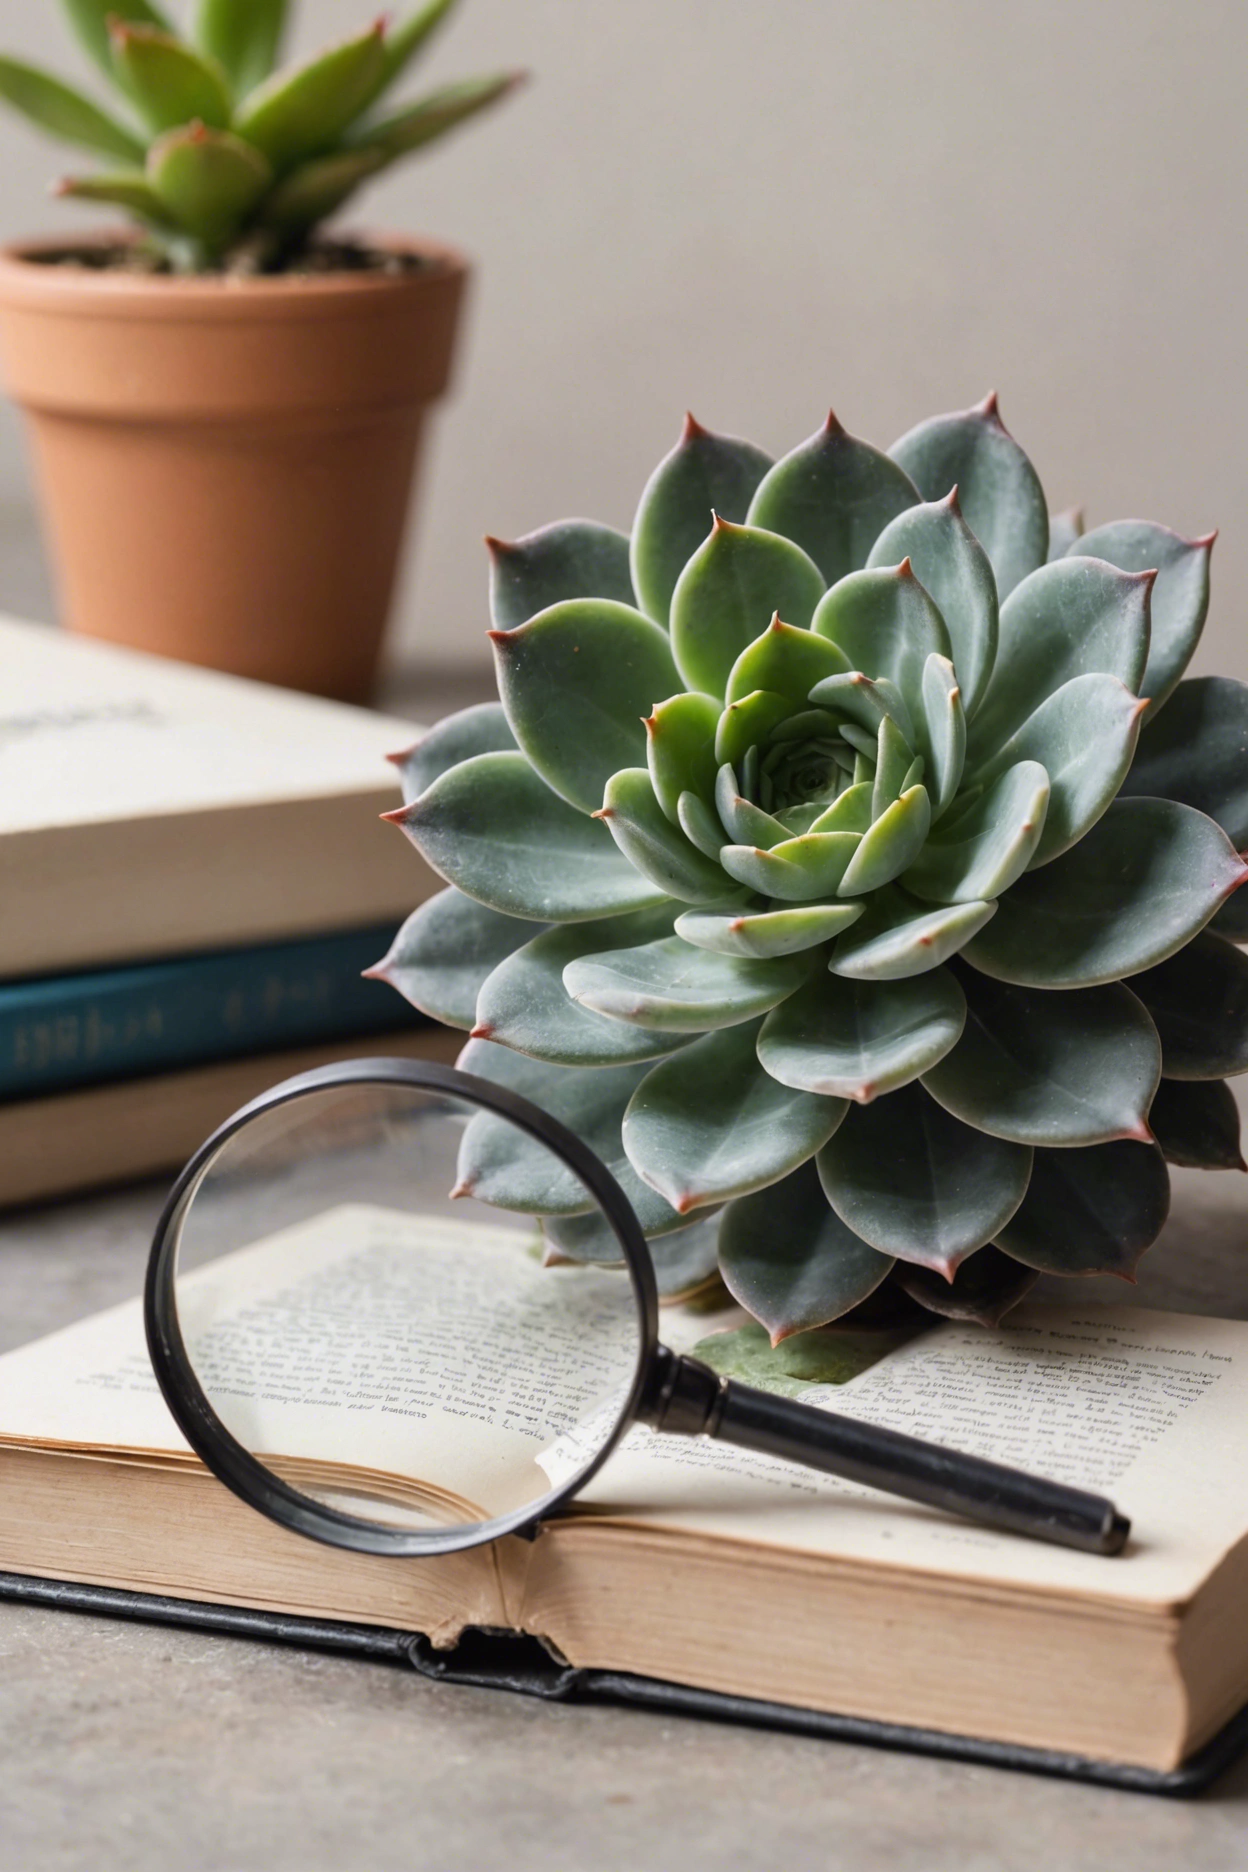 "Close-up of a stressed gray succulent with shriveled leaves and discoloration, magnifying glass and care book in background."